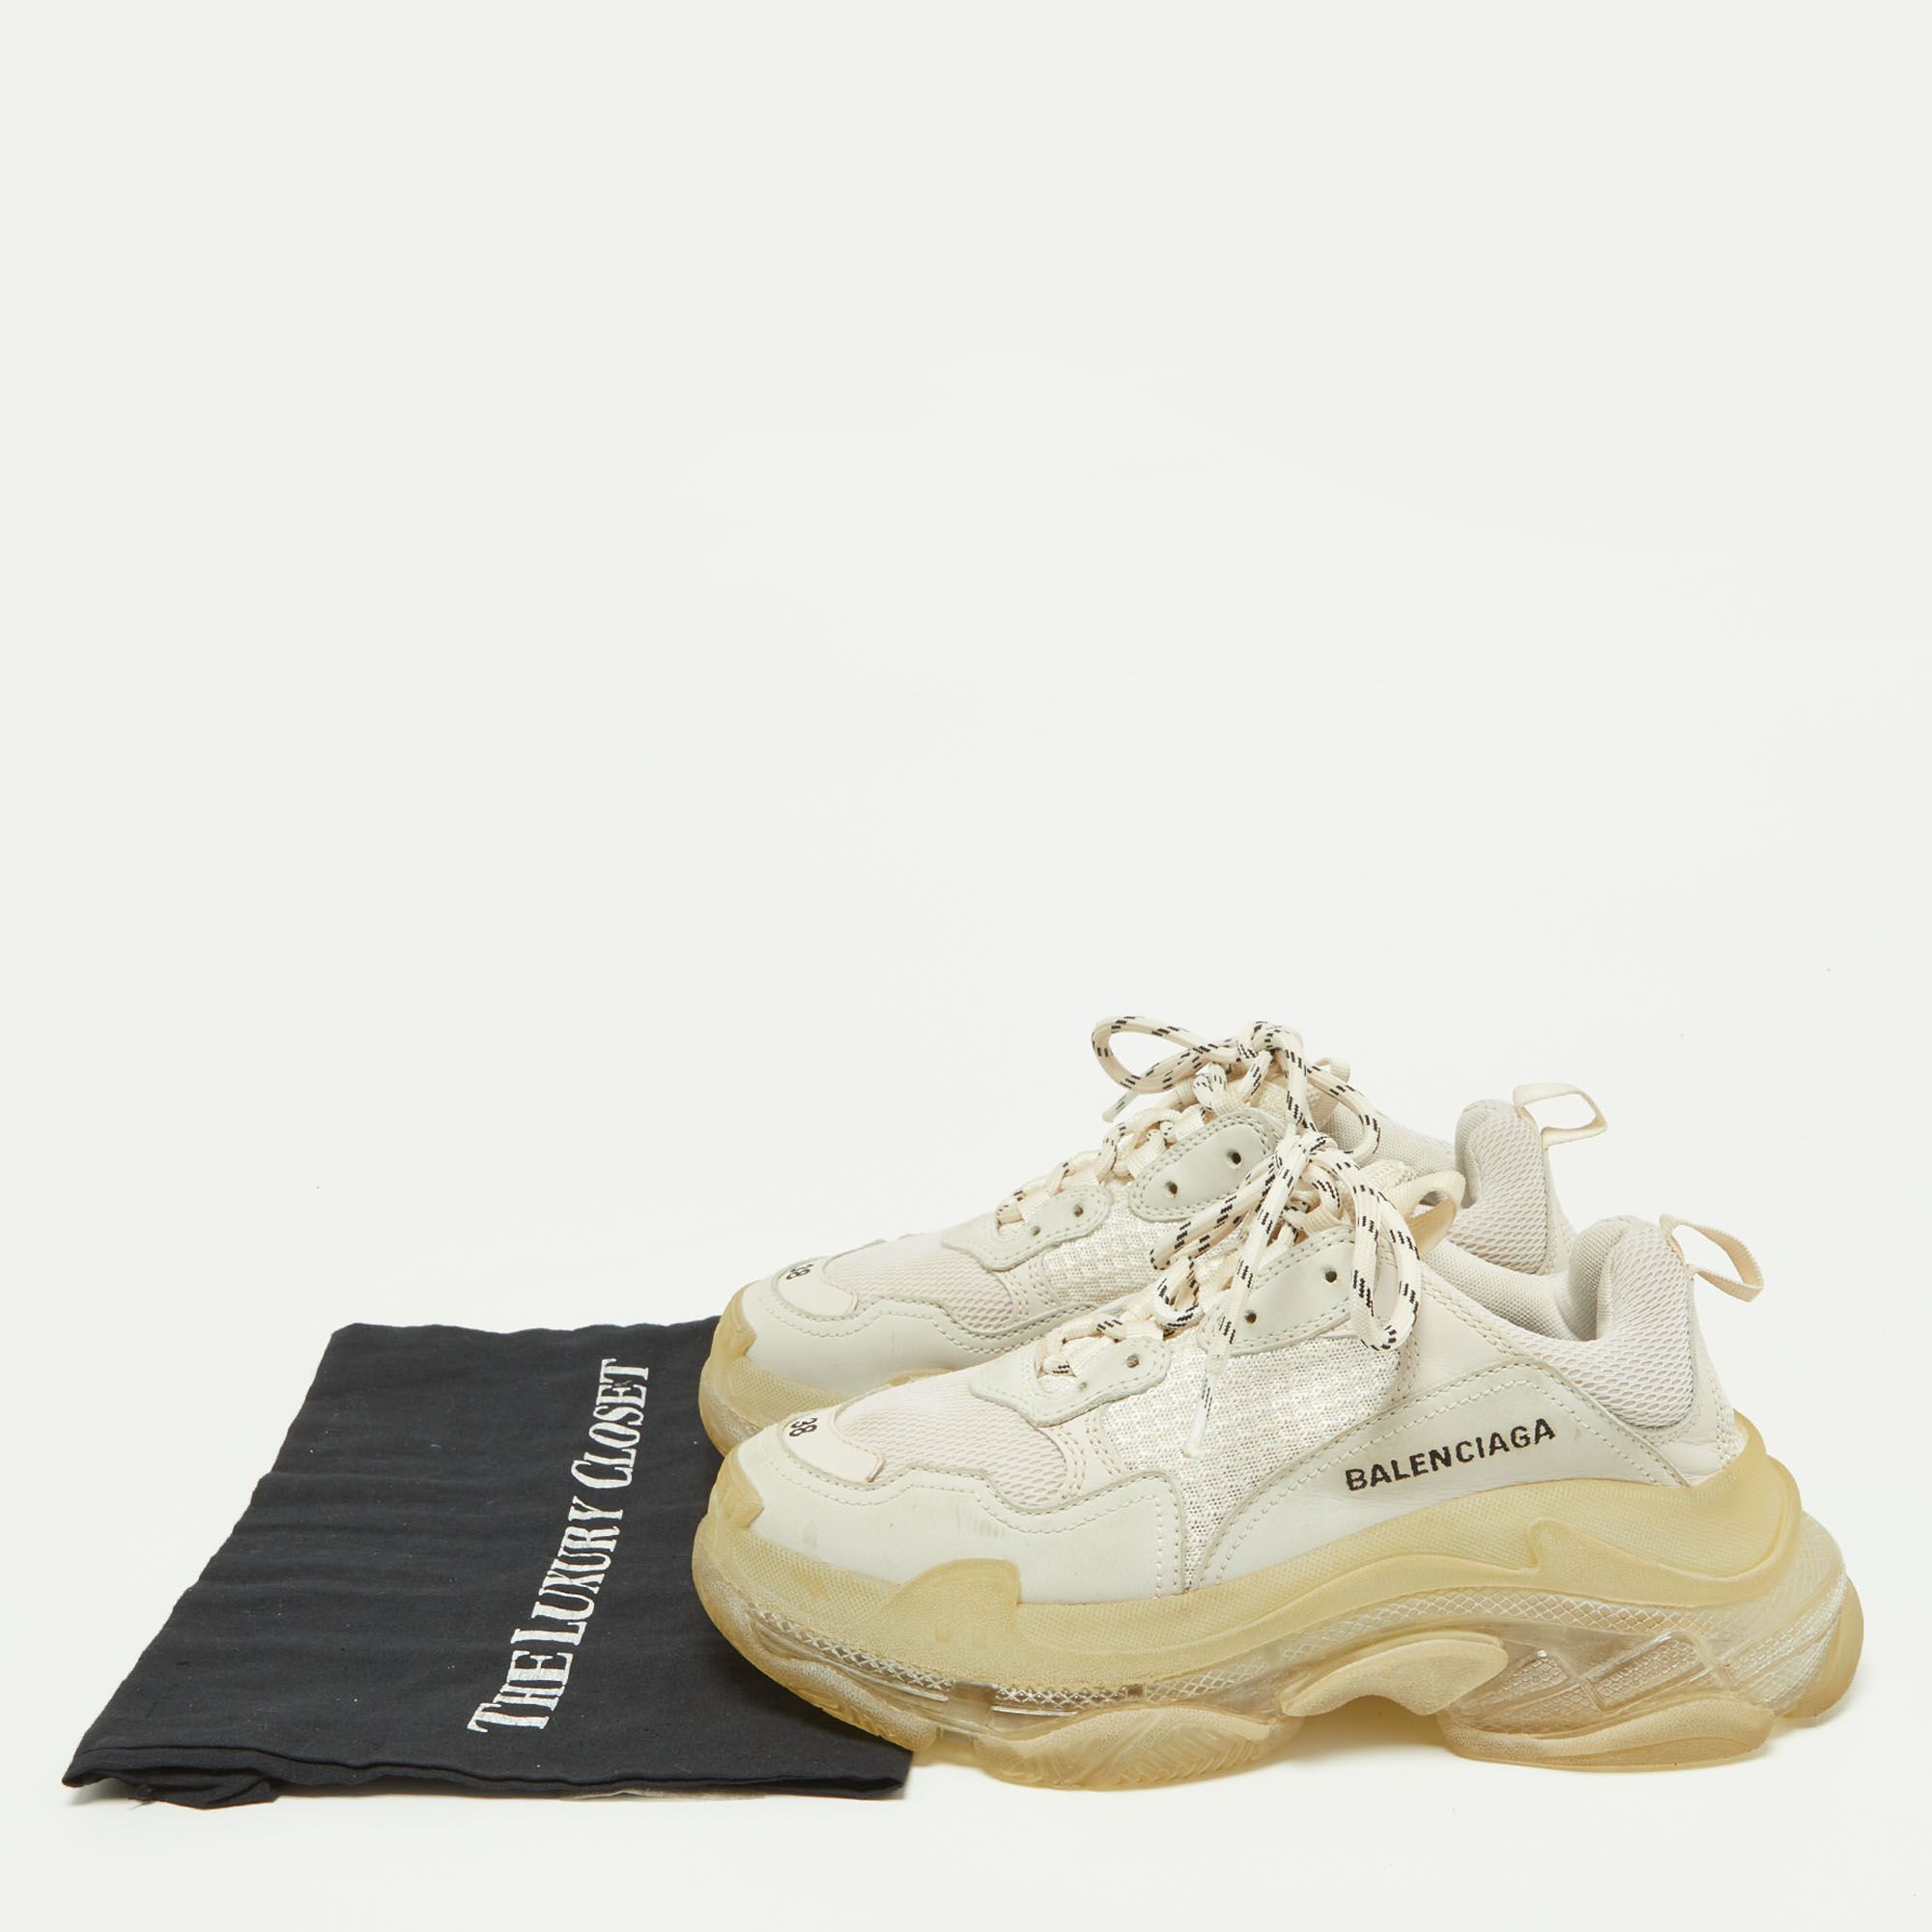 Balenciaga Two Tone Leather And Mesh Triple S Clear Sneakers Size 38